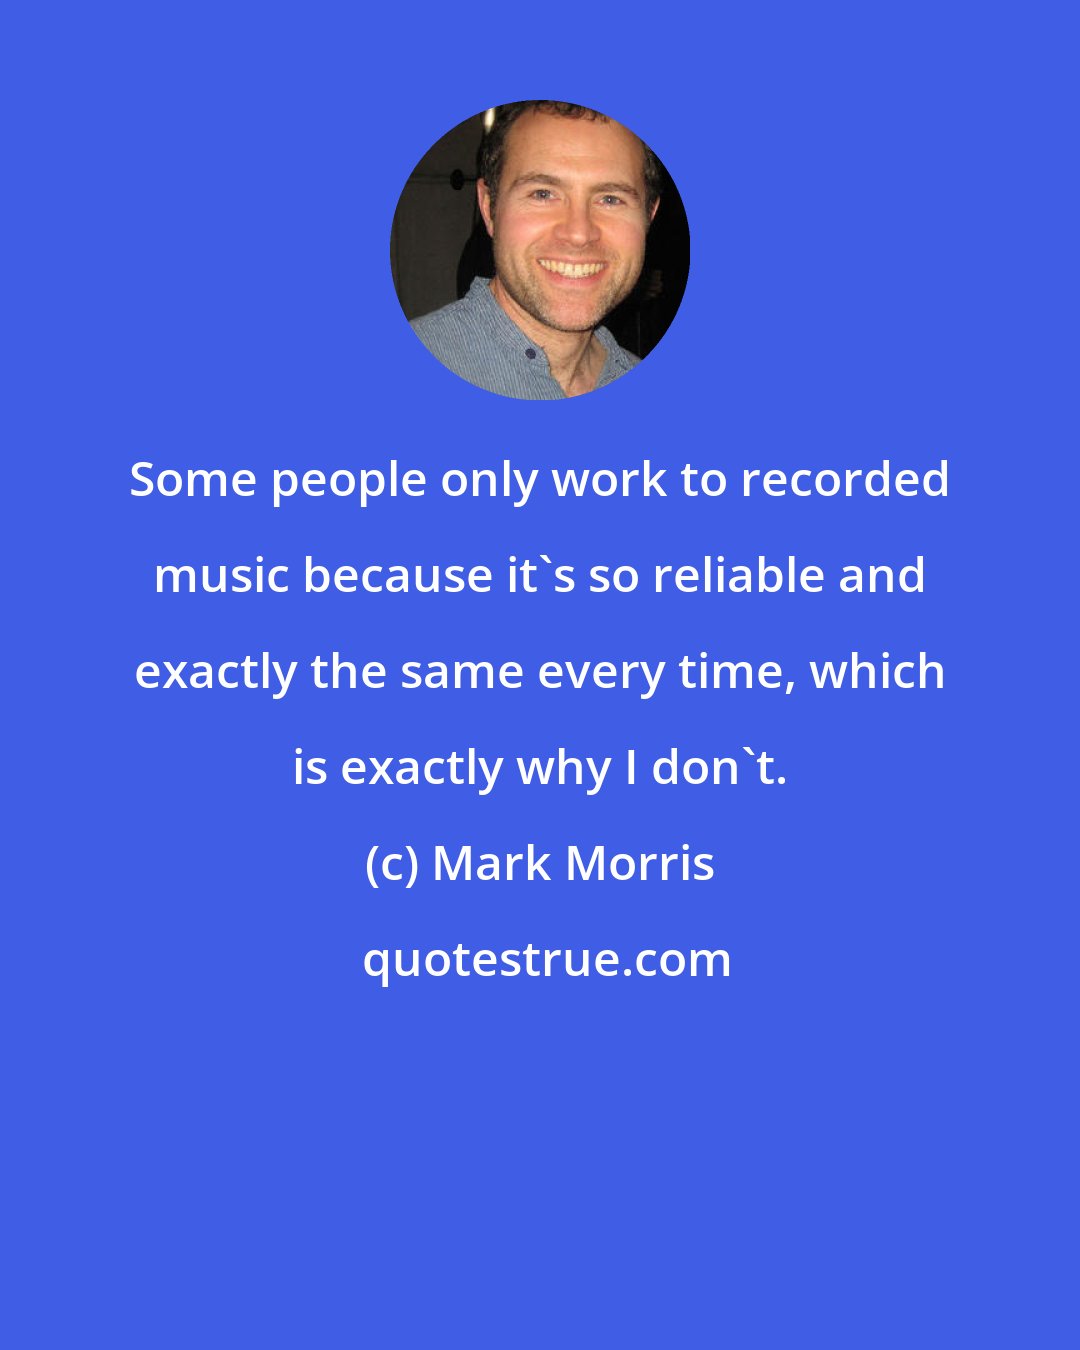 Mark Morris: Some people only work to recorded music because it's so reliable and exactly the same every time, which is exactly why I don't.